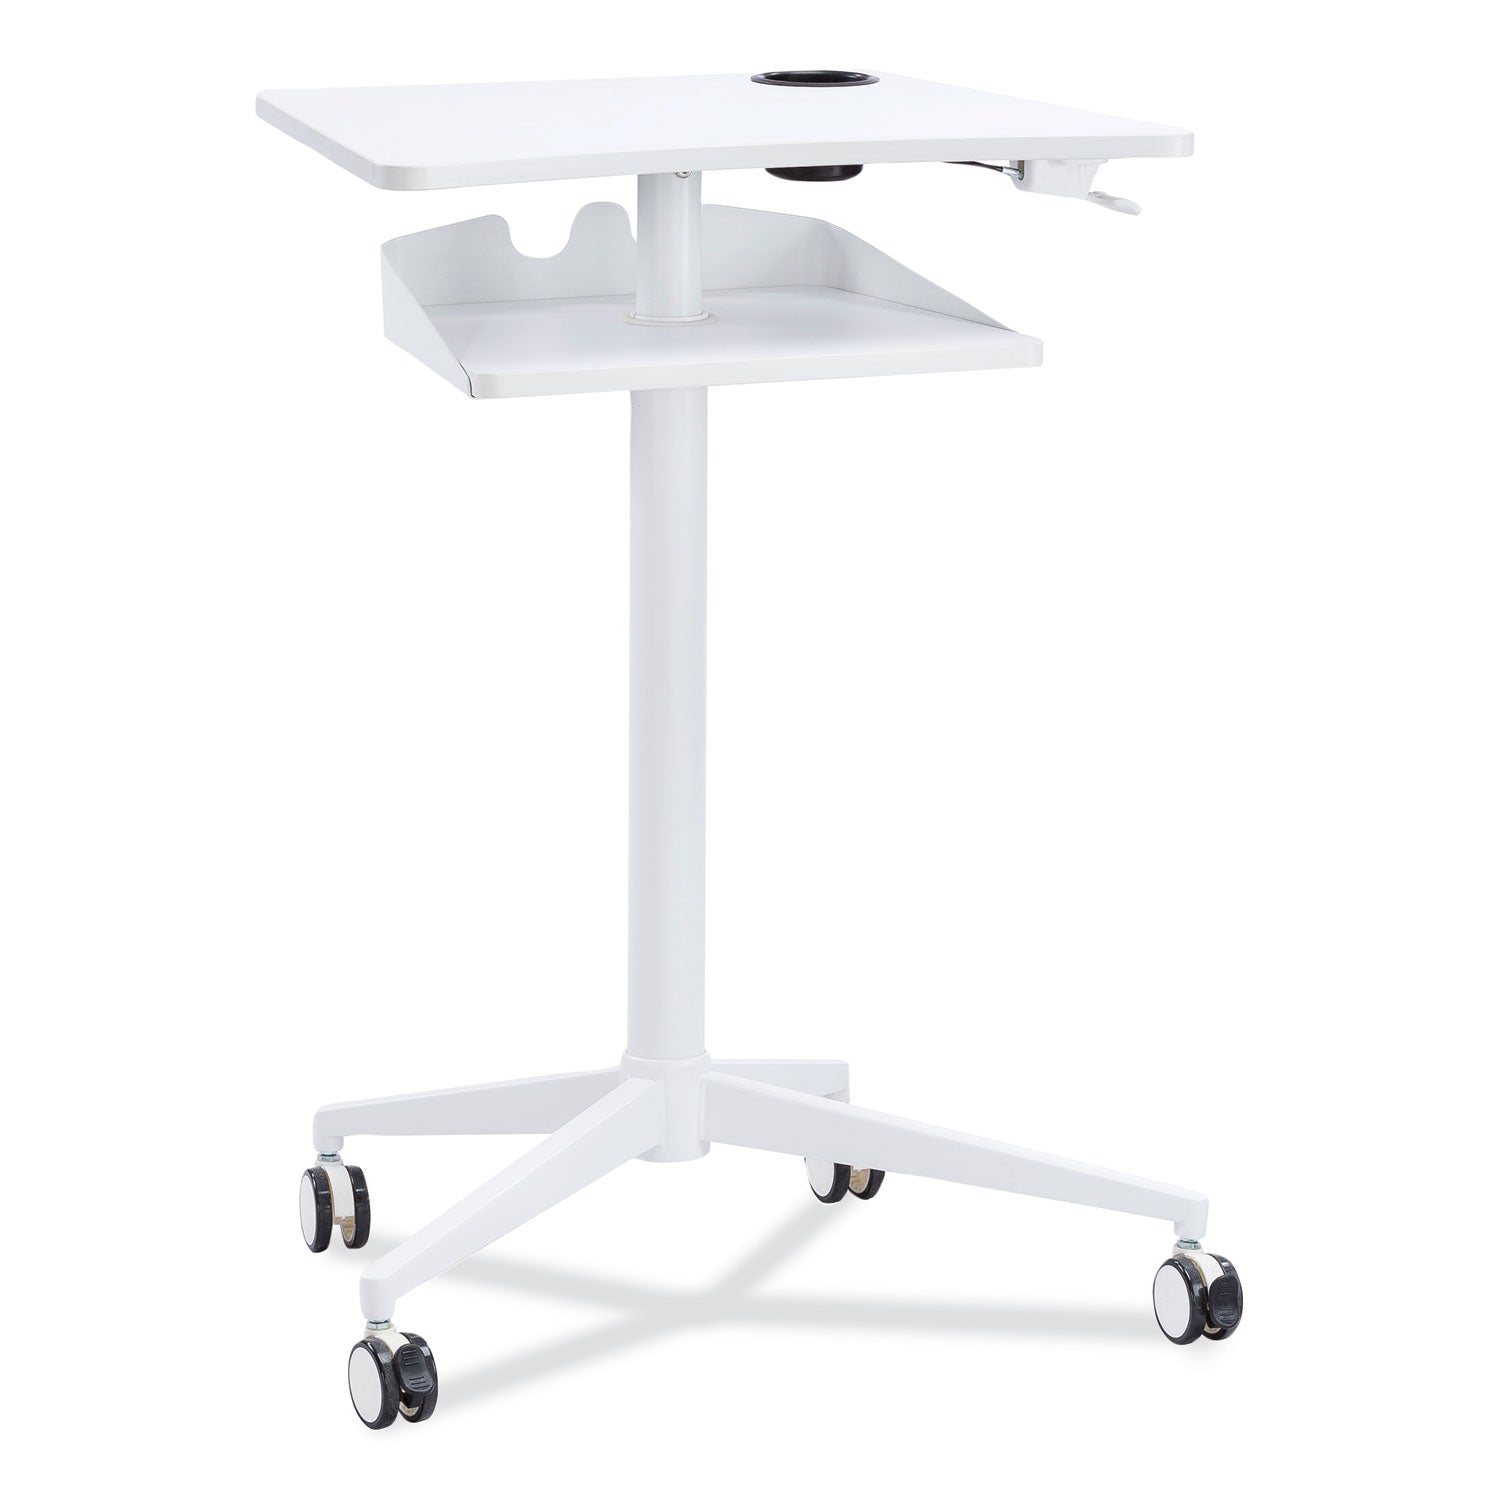 Safco Active Collection Vum Mobile Workstation - 25.3" x 19.8"47.8" - 2 Shelve(s) - Finish: White - 1